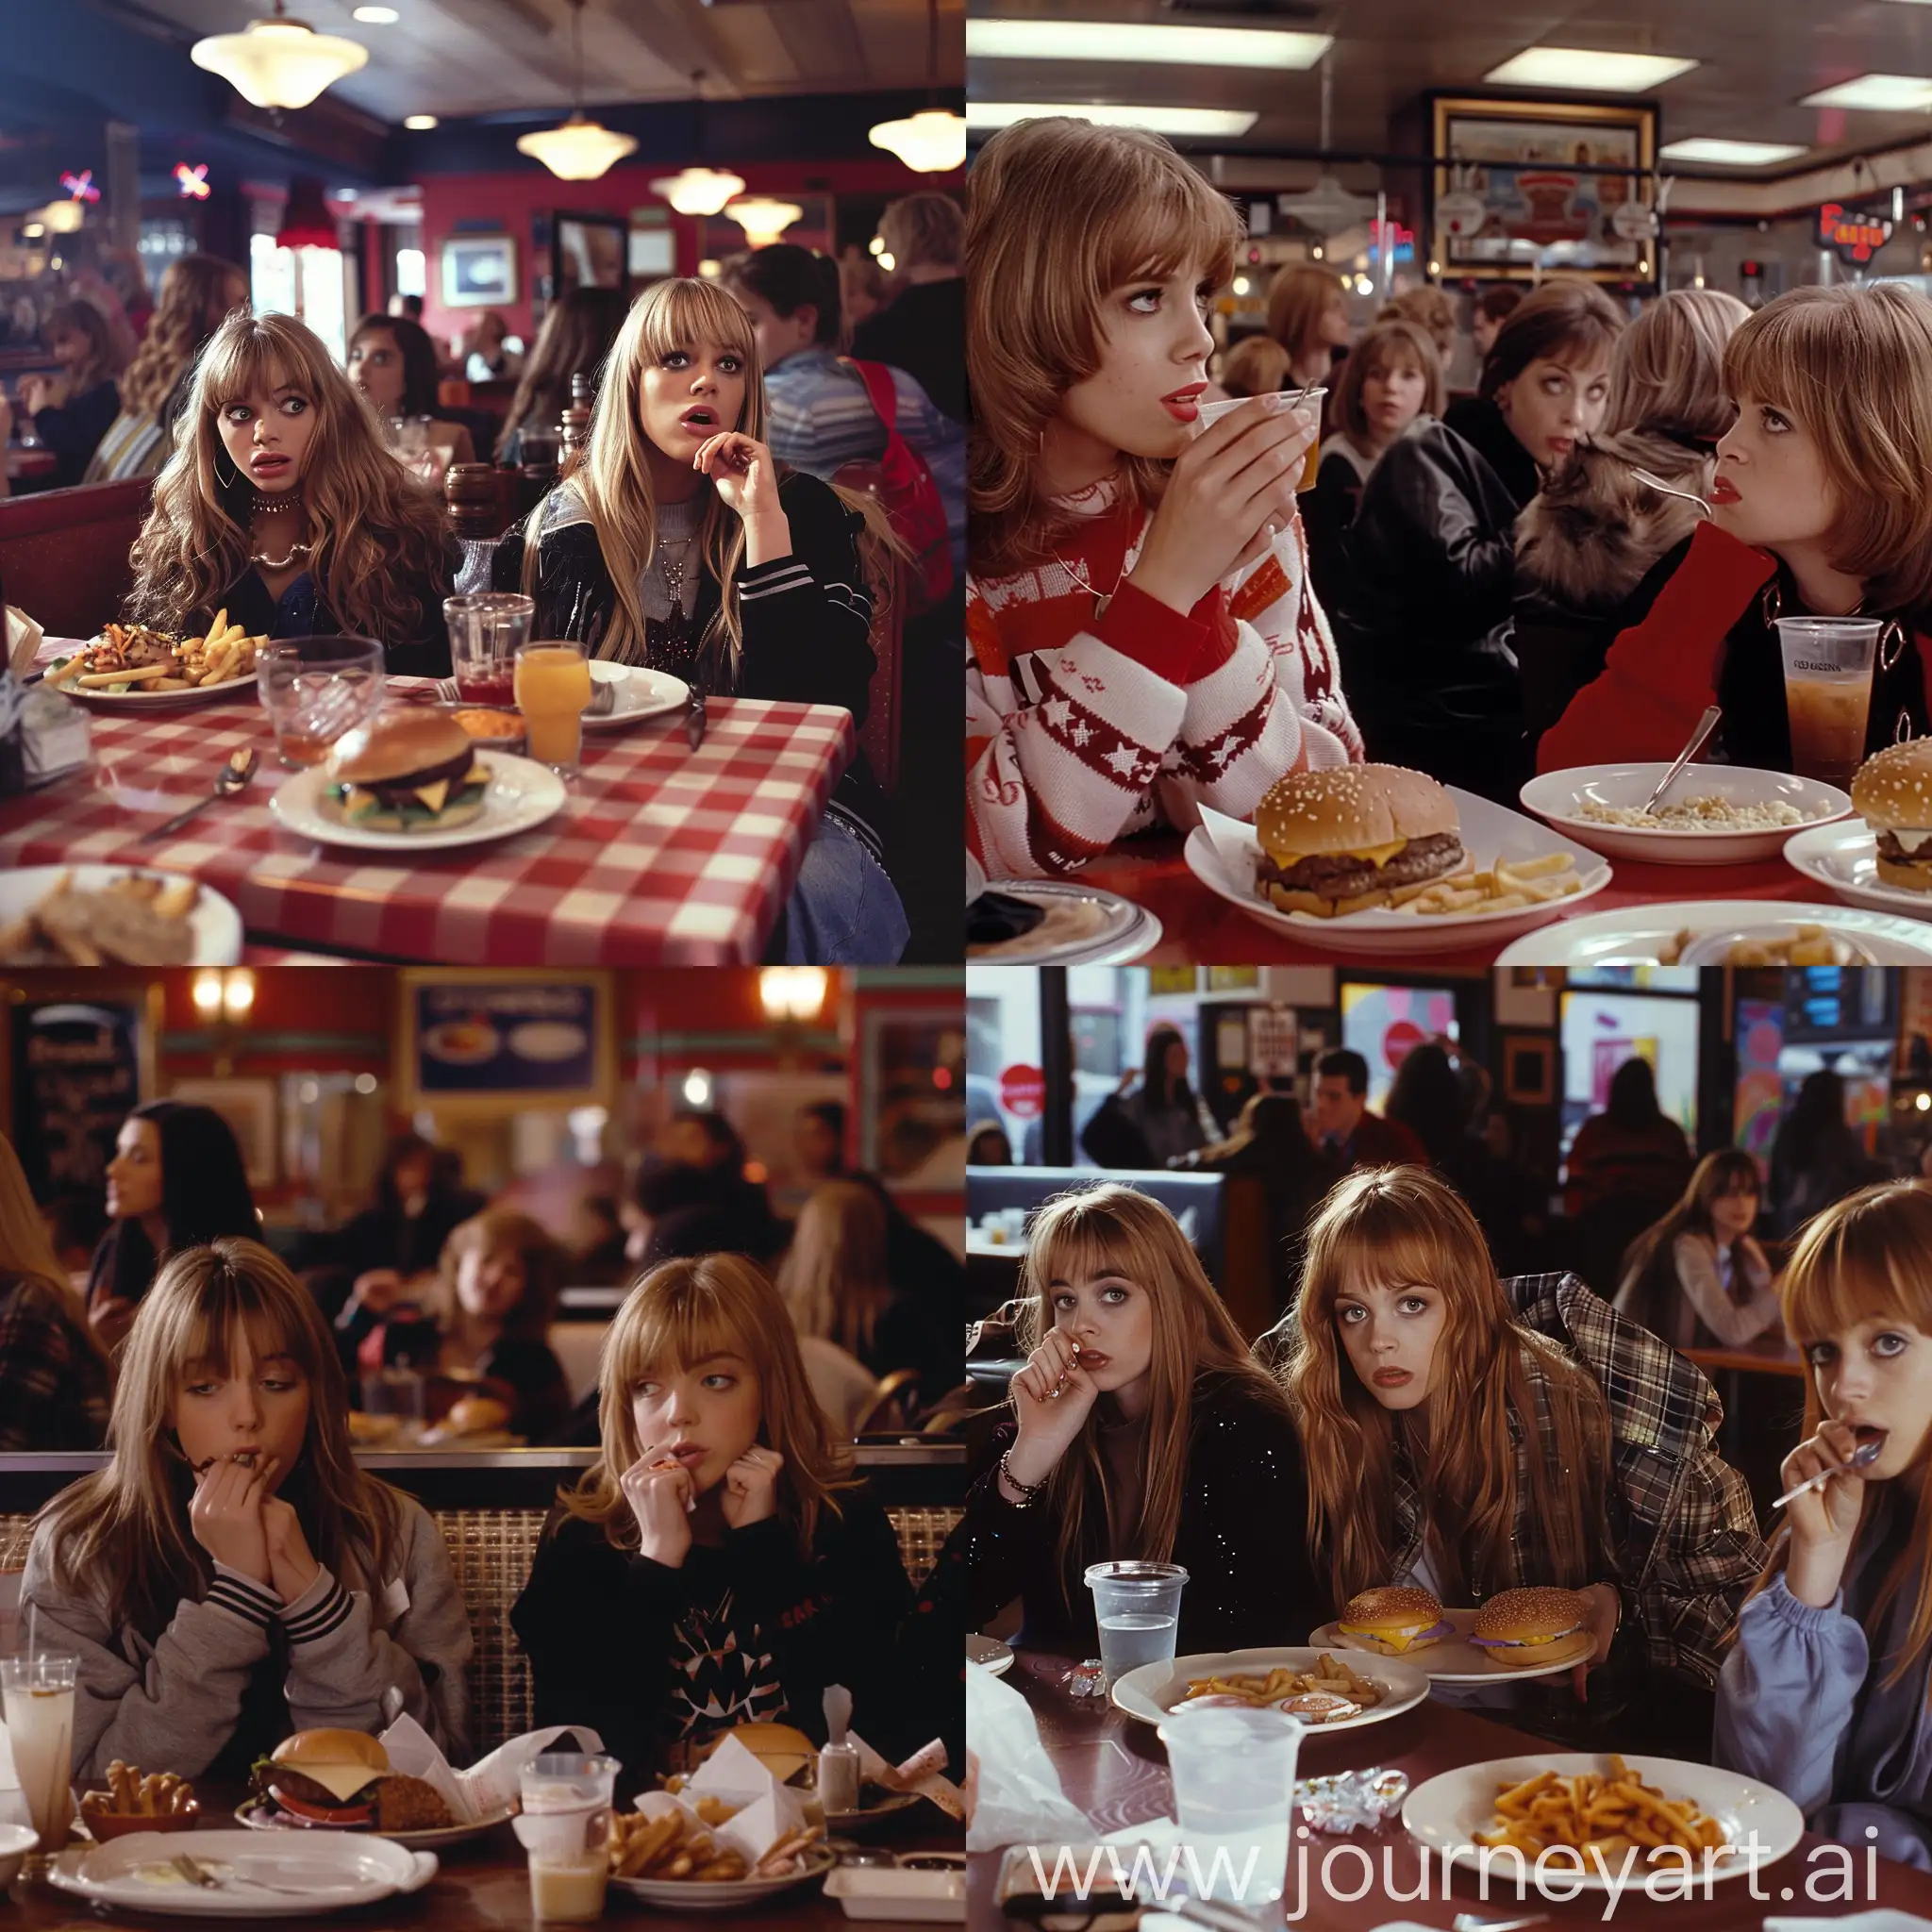 Regina George and Karen eating at the Restaurant ,still from the movie "Mean Girls"